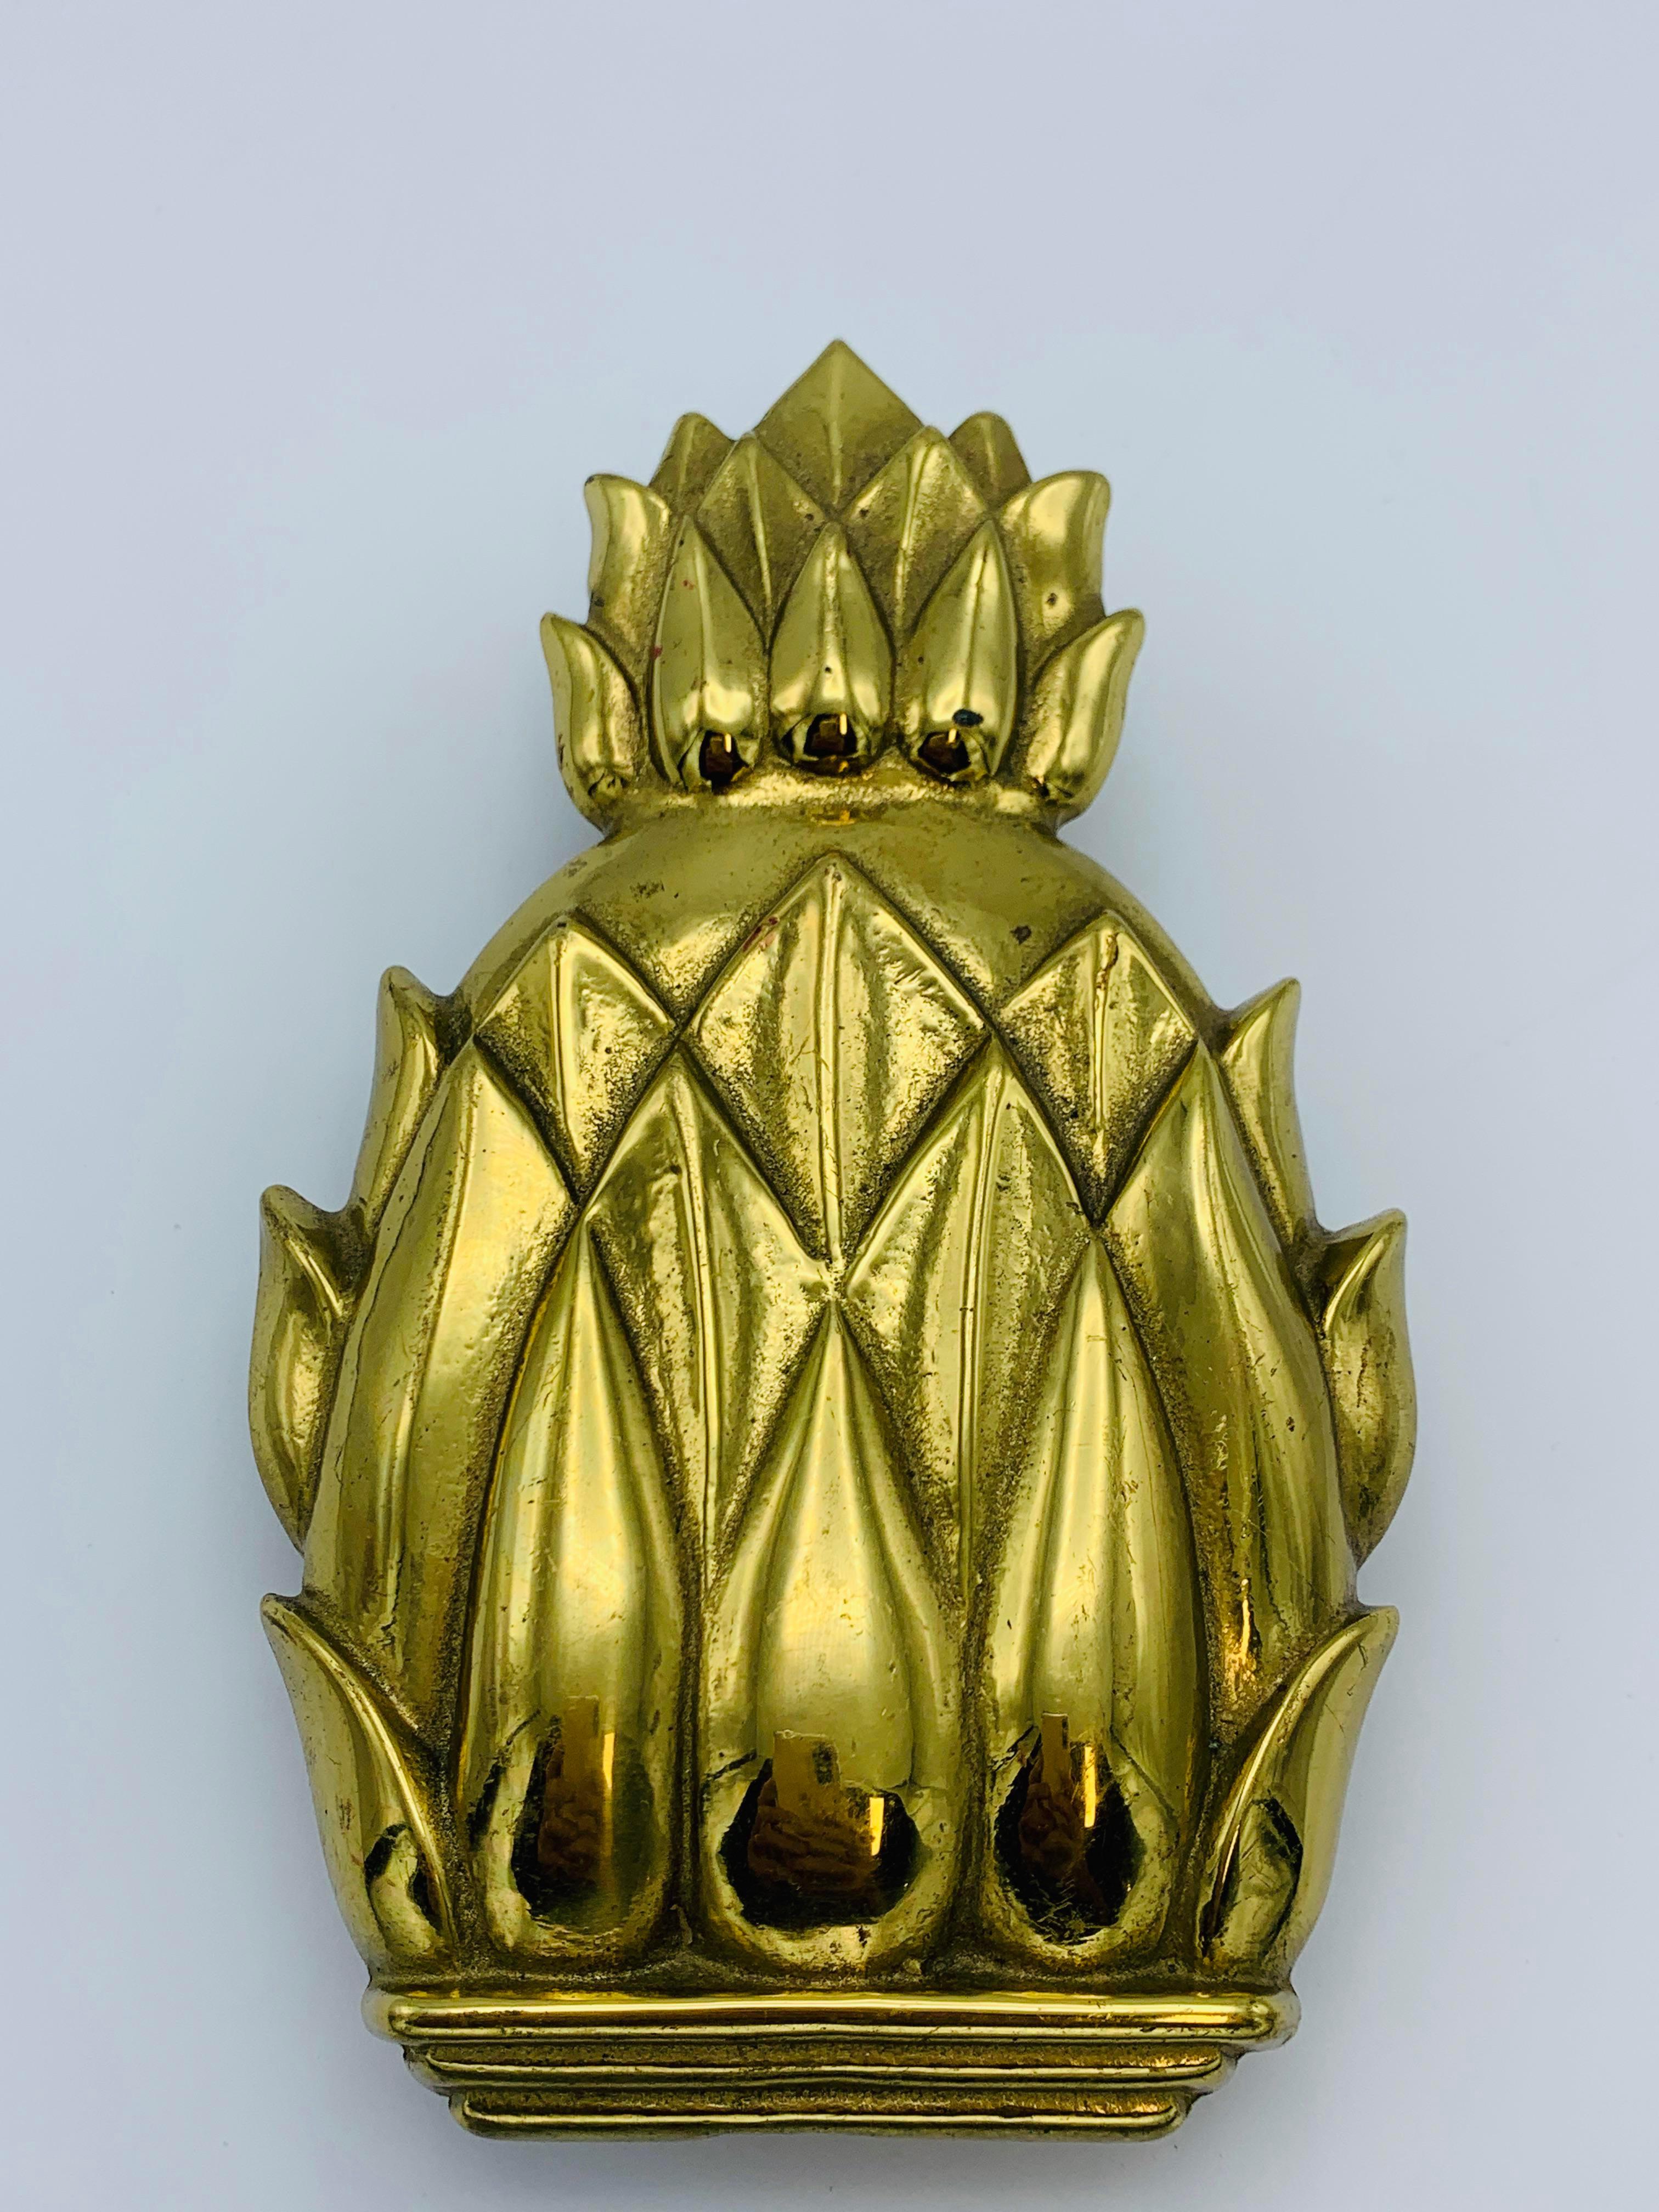 Listed is a stunning, solid-brass Virginia Metalcrafters pineapple door knocker, circa 1960s. Heavily polished and appears to have never been used. Marked on backside with Virginia Metalcrafters signature 'VMC' stamp and the pieces name and item